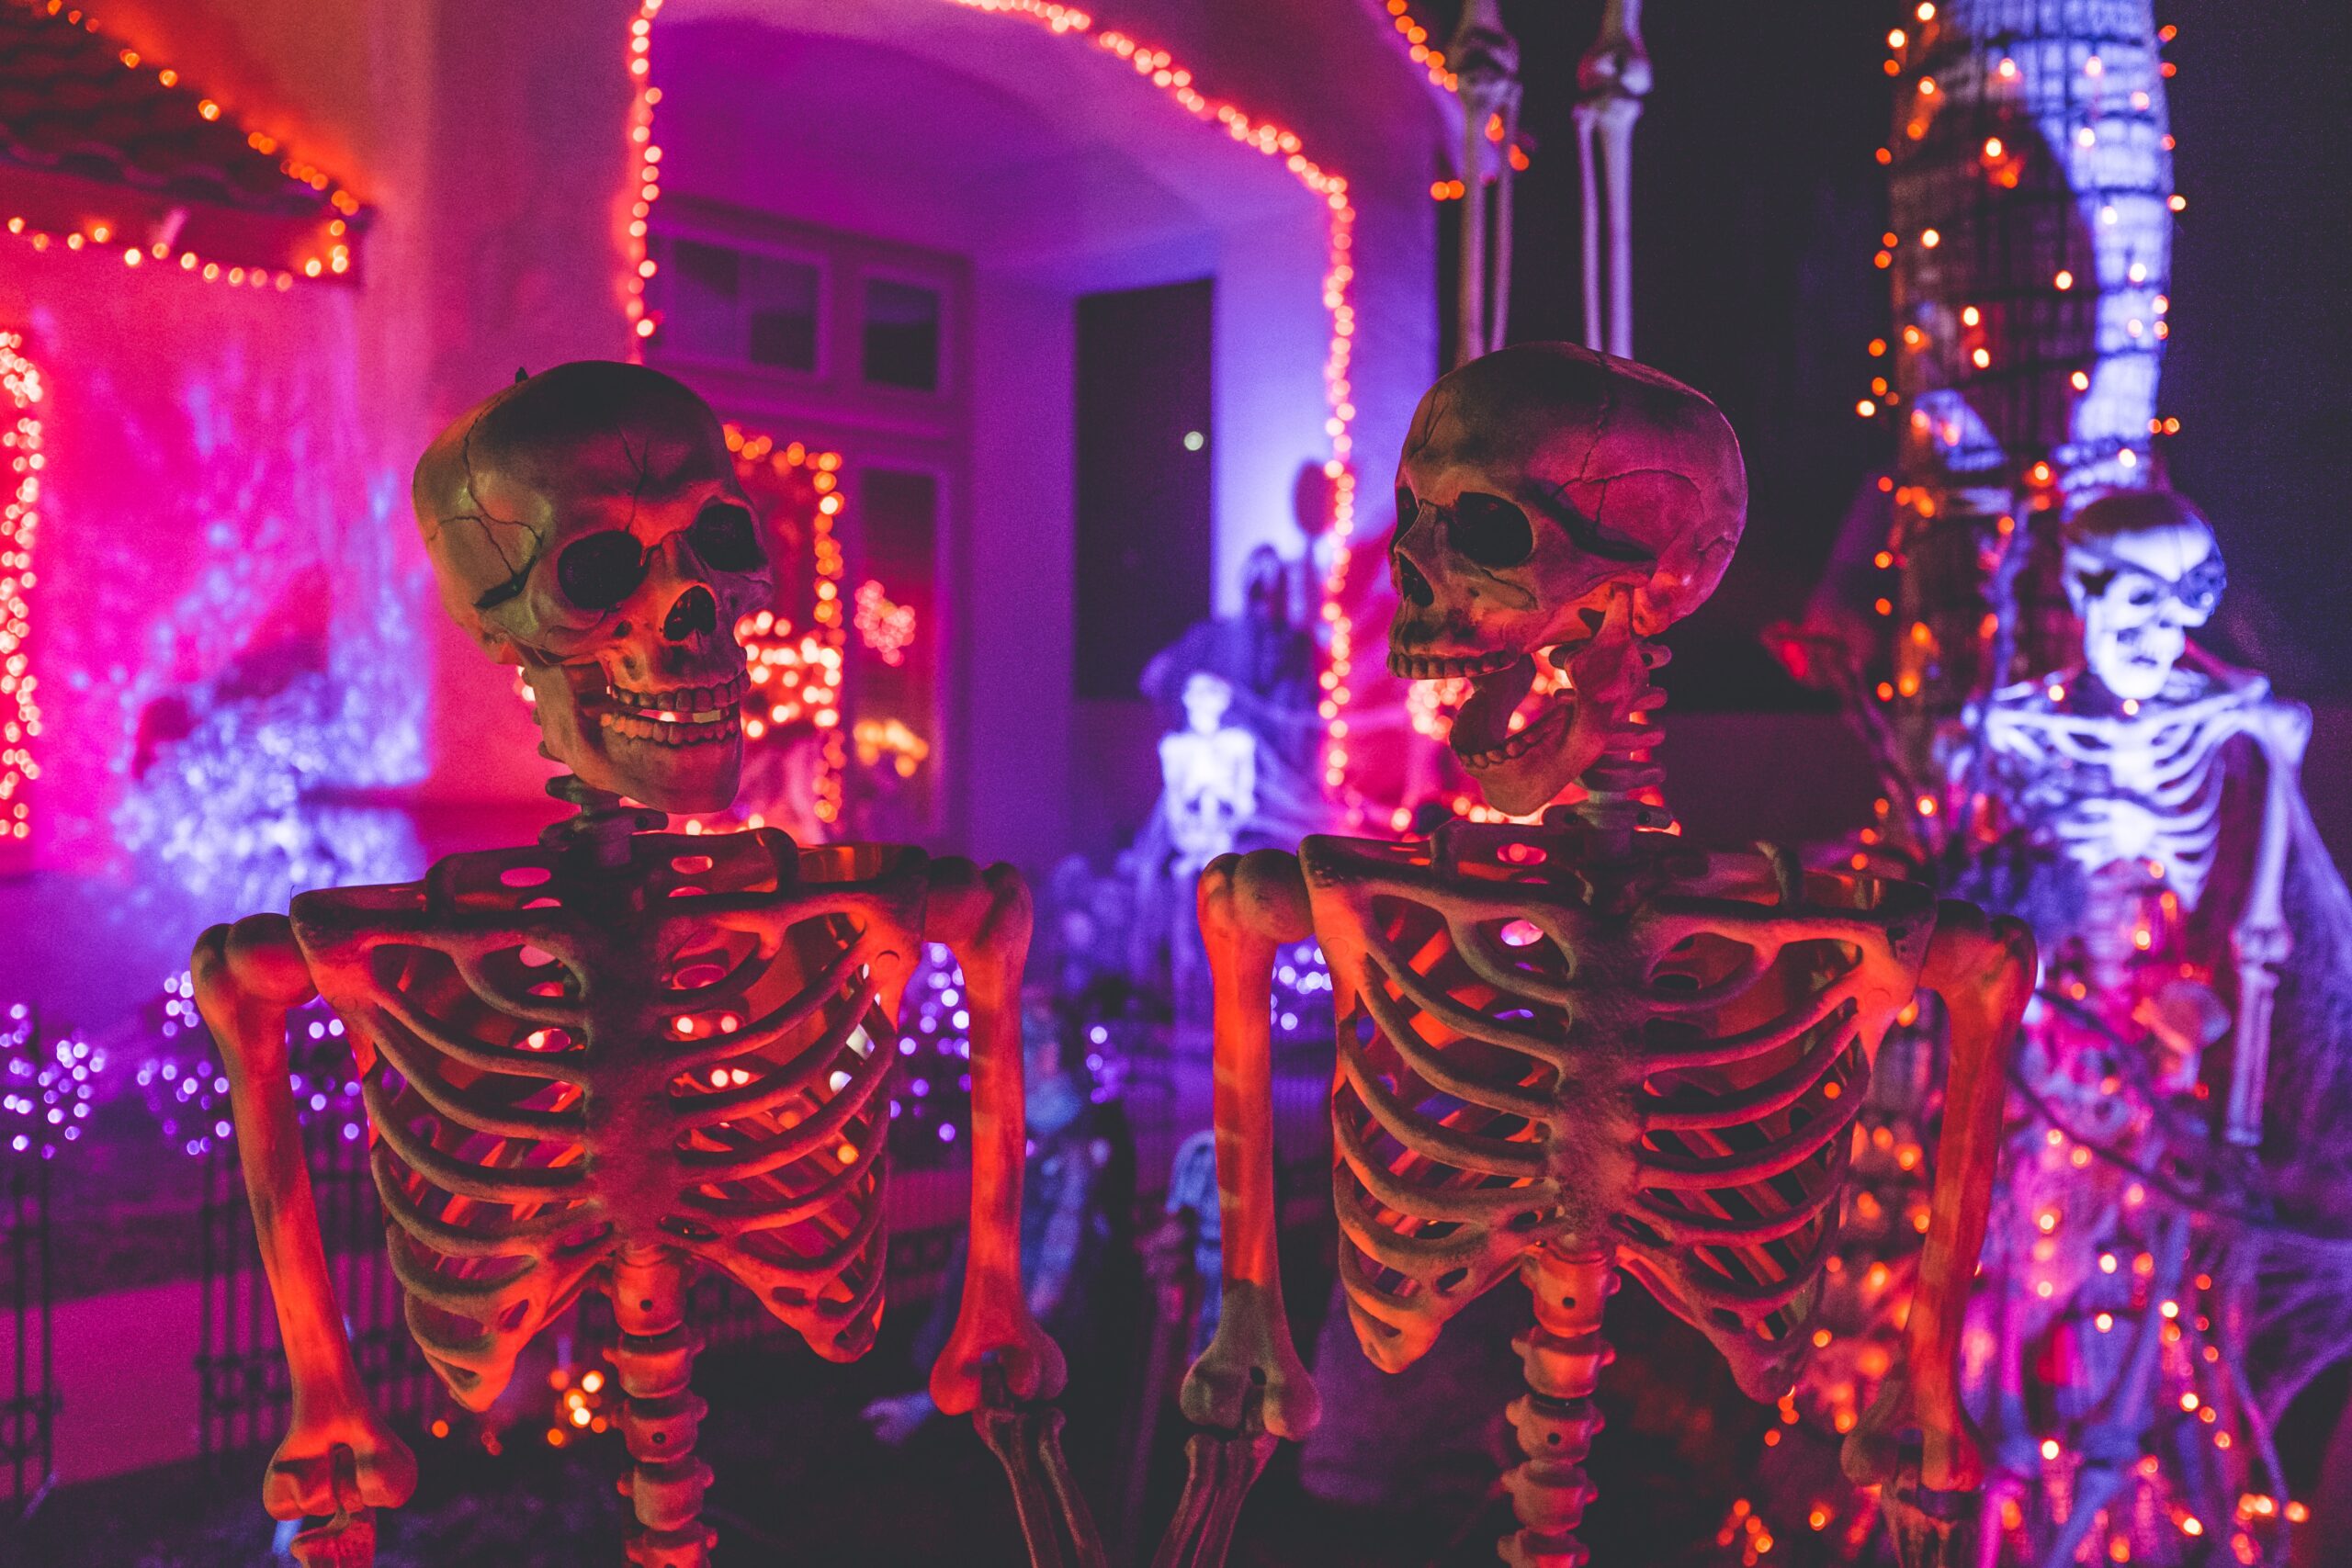 Create a bold Halloween aesthetic. Pictured: Skeleton decorations.